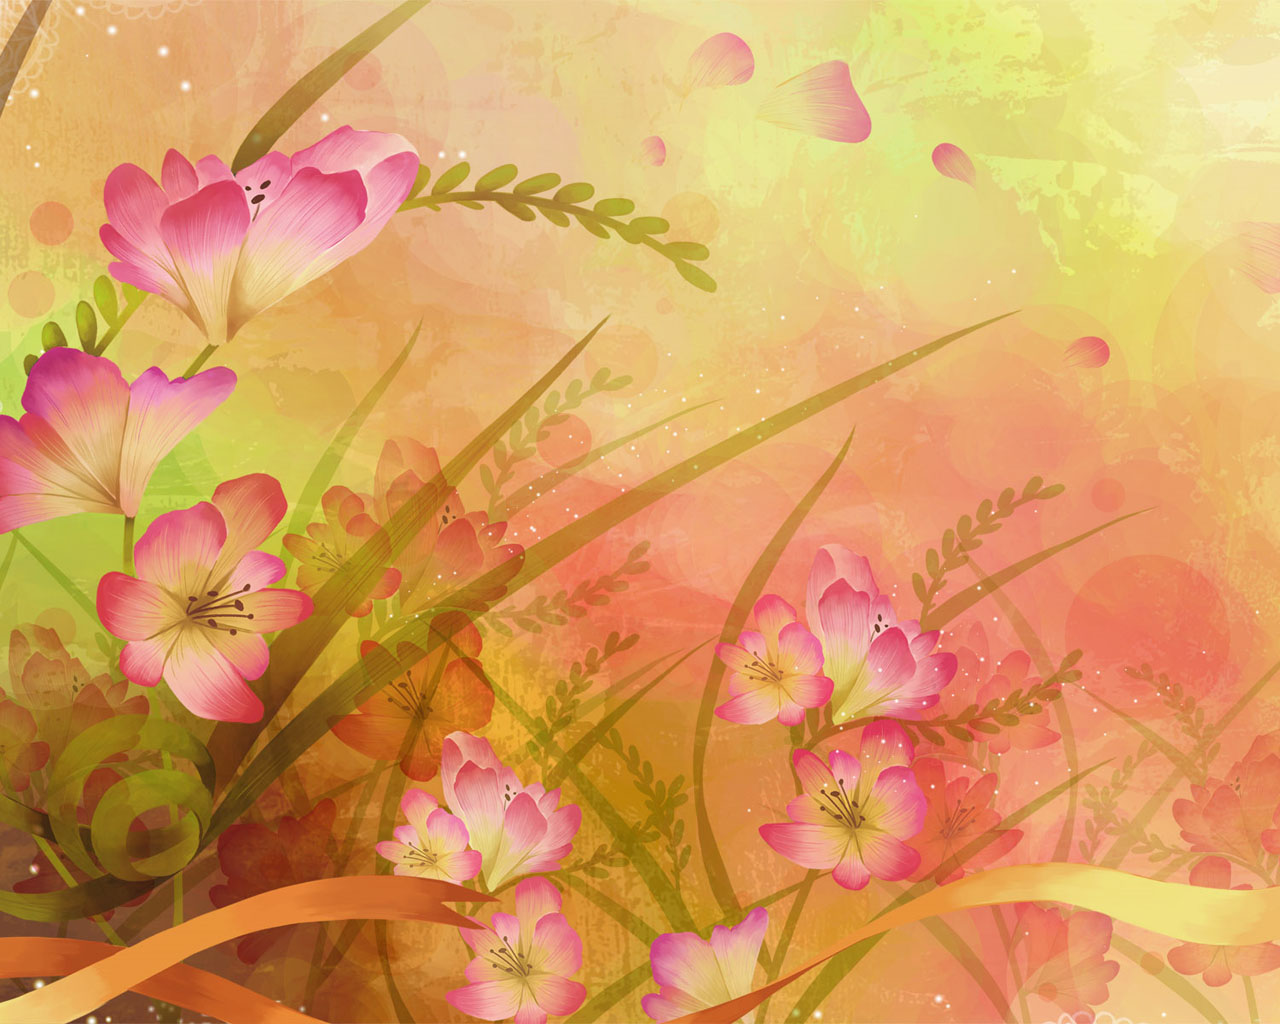 New Floral Wallpapers Feb Free Screensavers and Backgrounds